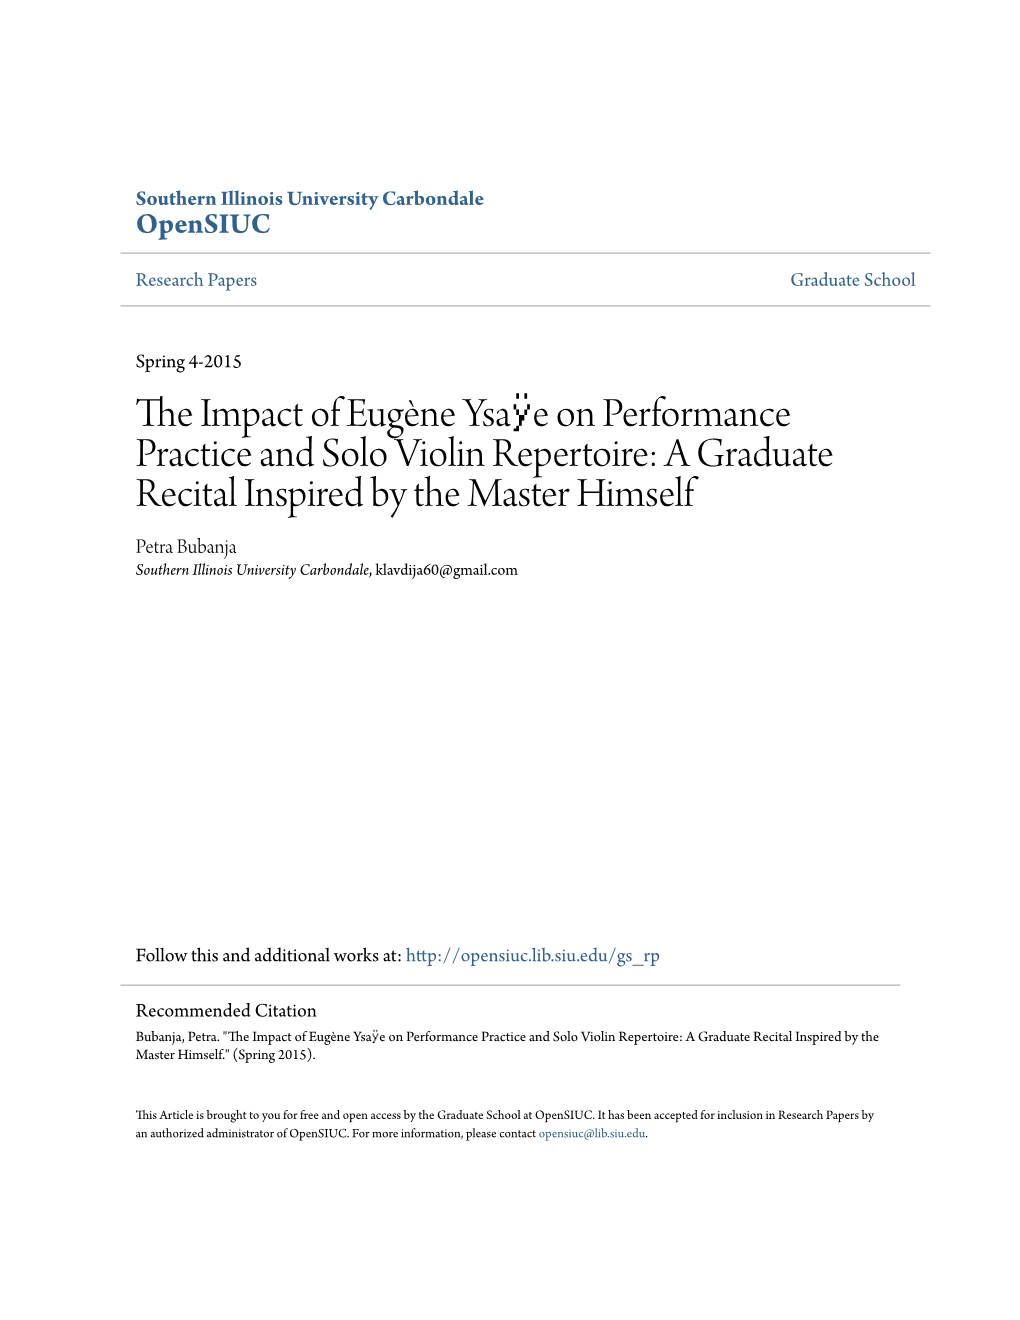 The Impact of Eugène Ysaӱe on Performance Practice and Solo